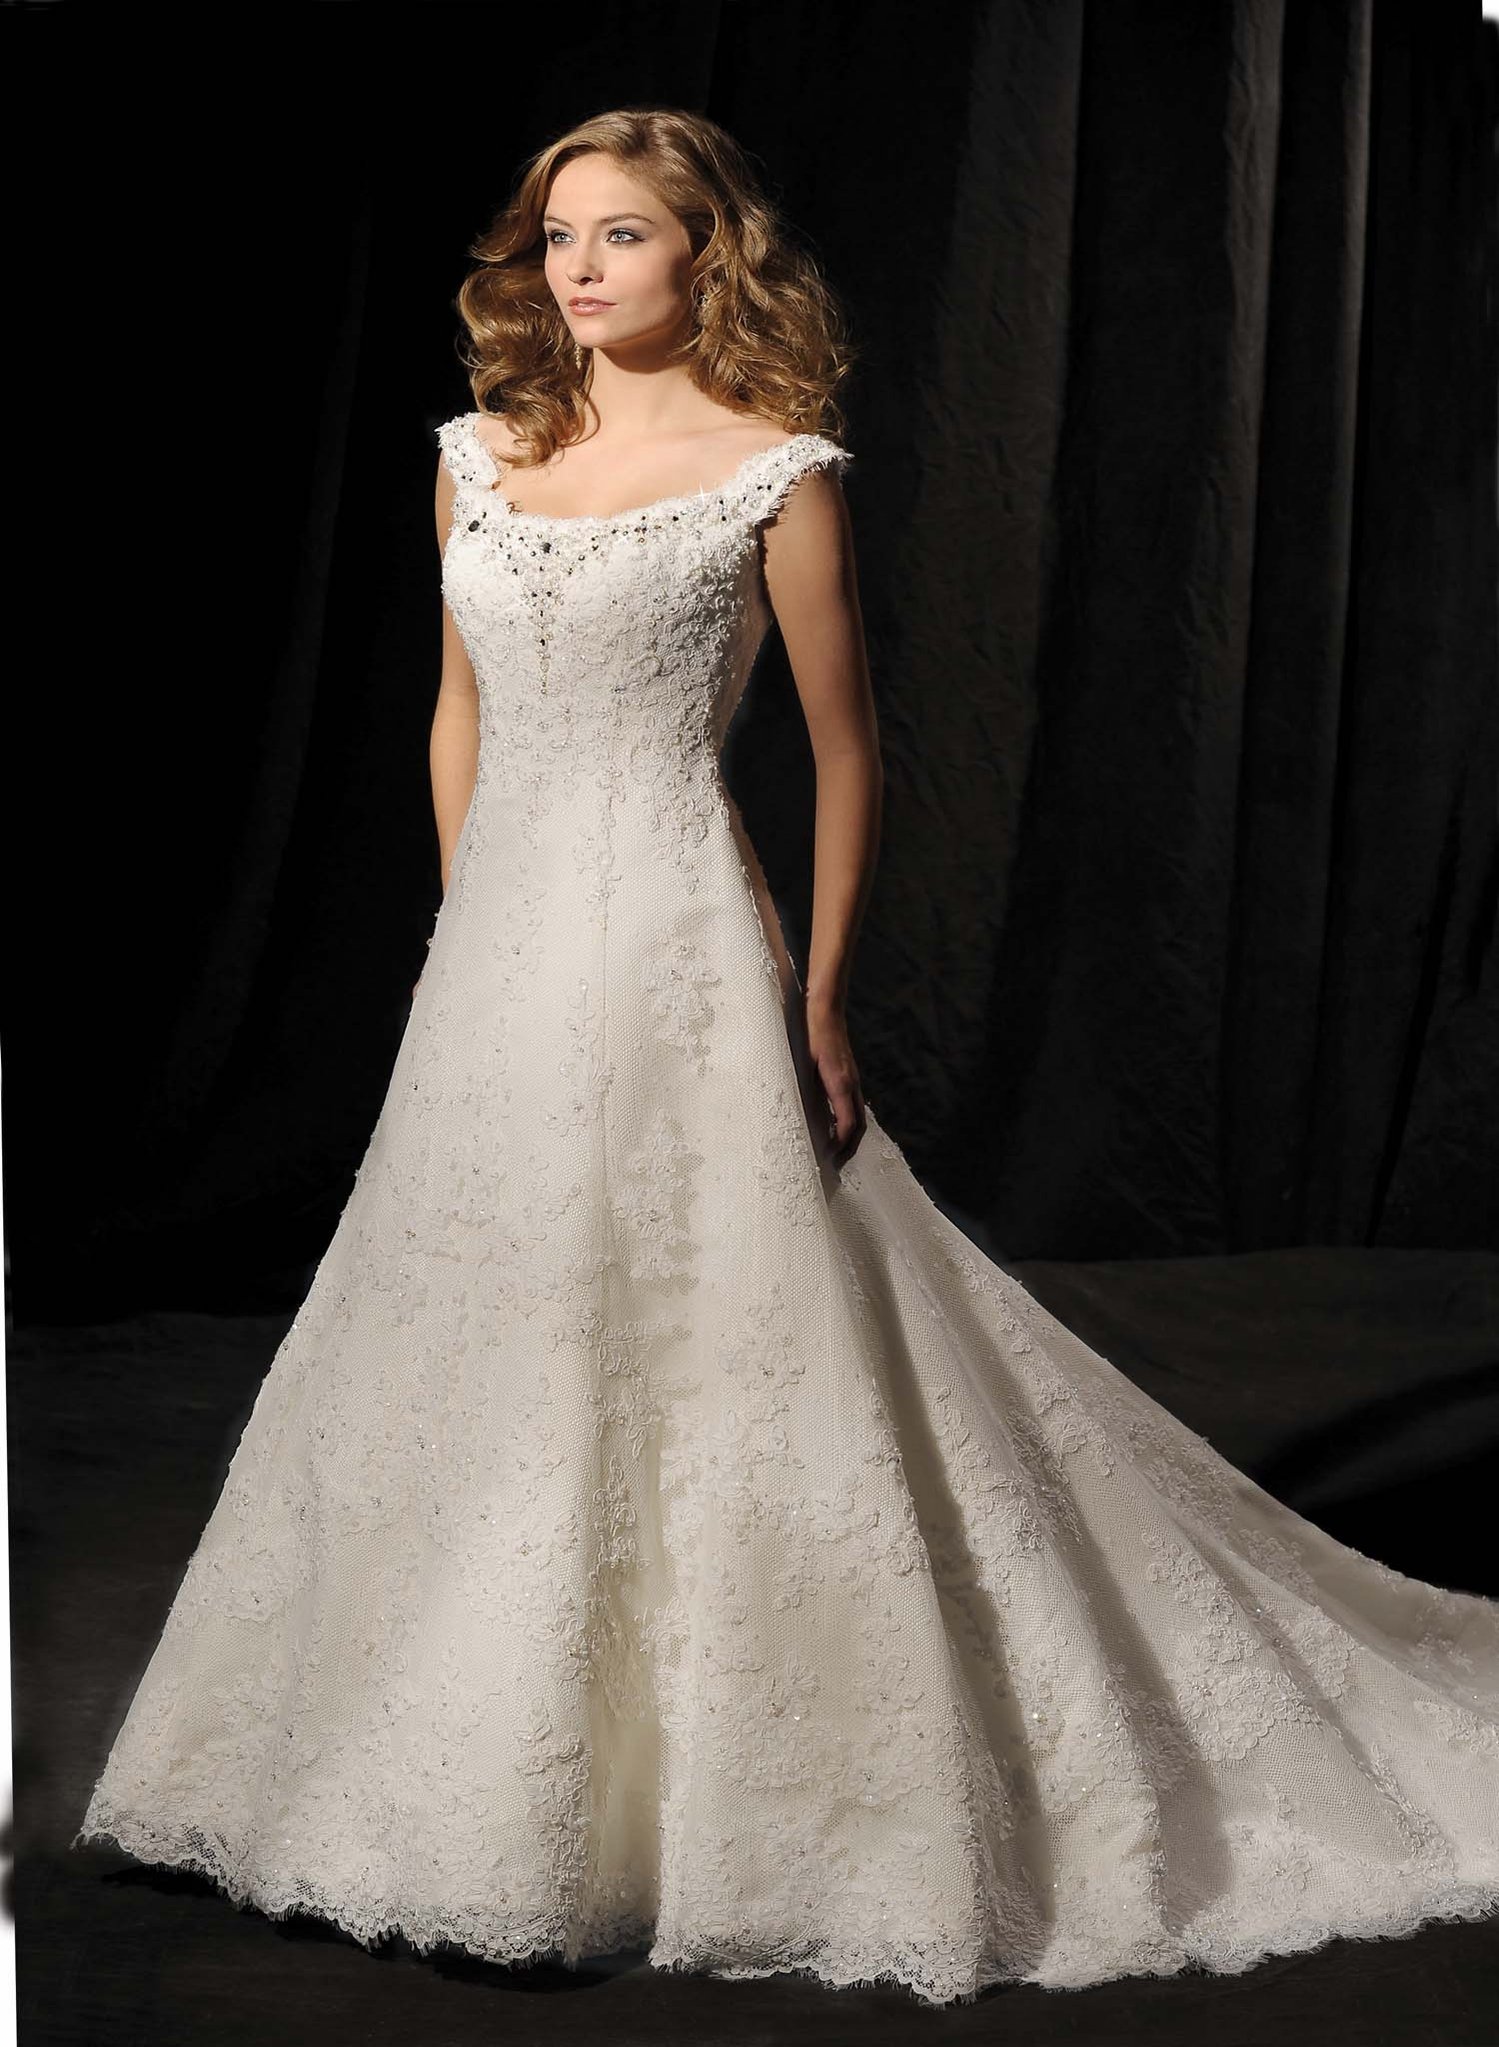 Best All Lace Wedding Dress The ultimate guide | blackwedding3